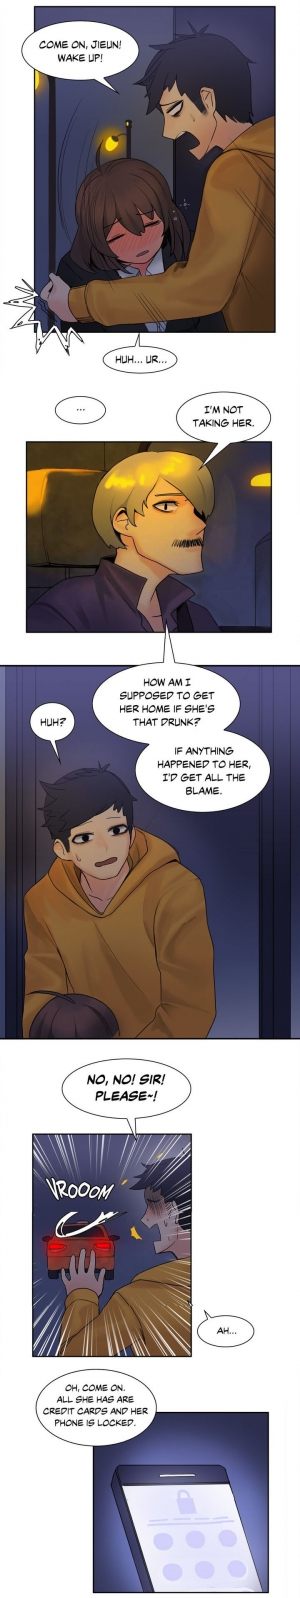 [Gaehoju, Gunnermul] The Girl That Got Stuck in the Wall Ch.11/11 [COMPLETED] [English] [Hentai Universe] - Page 64